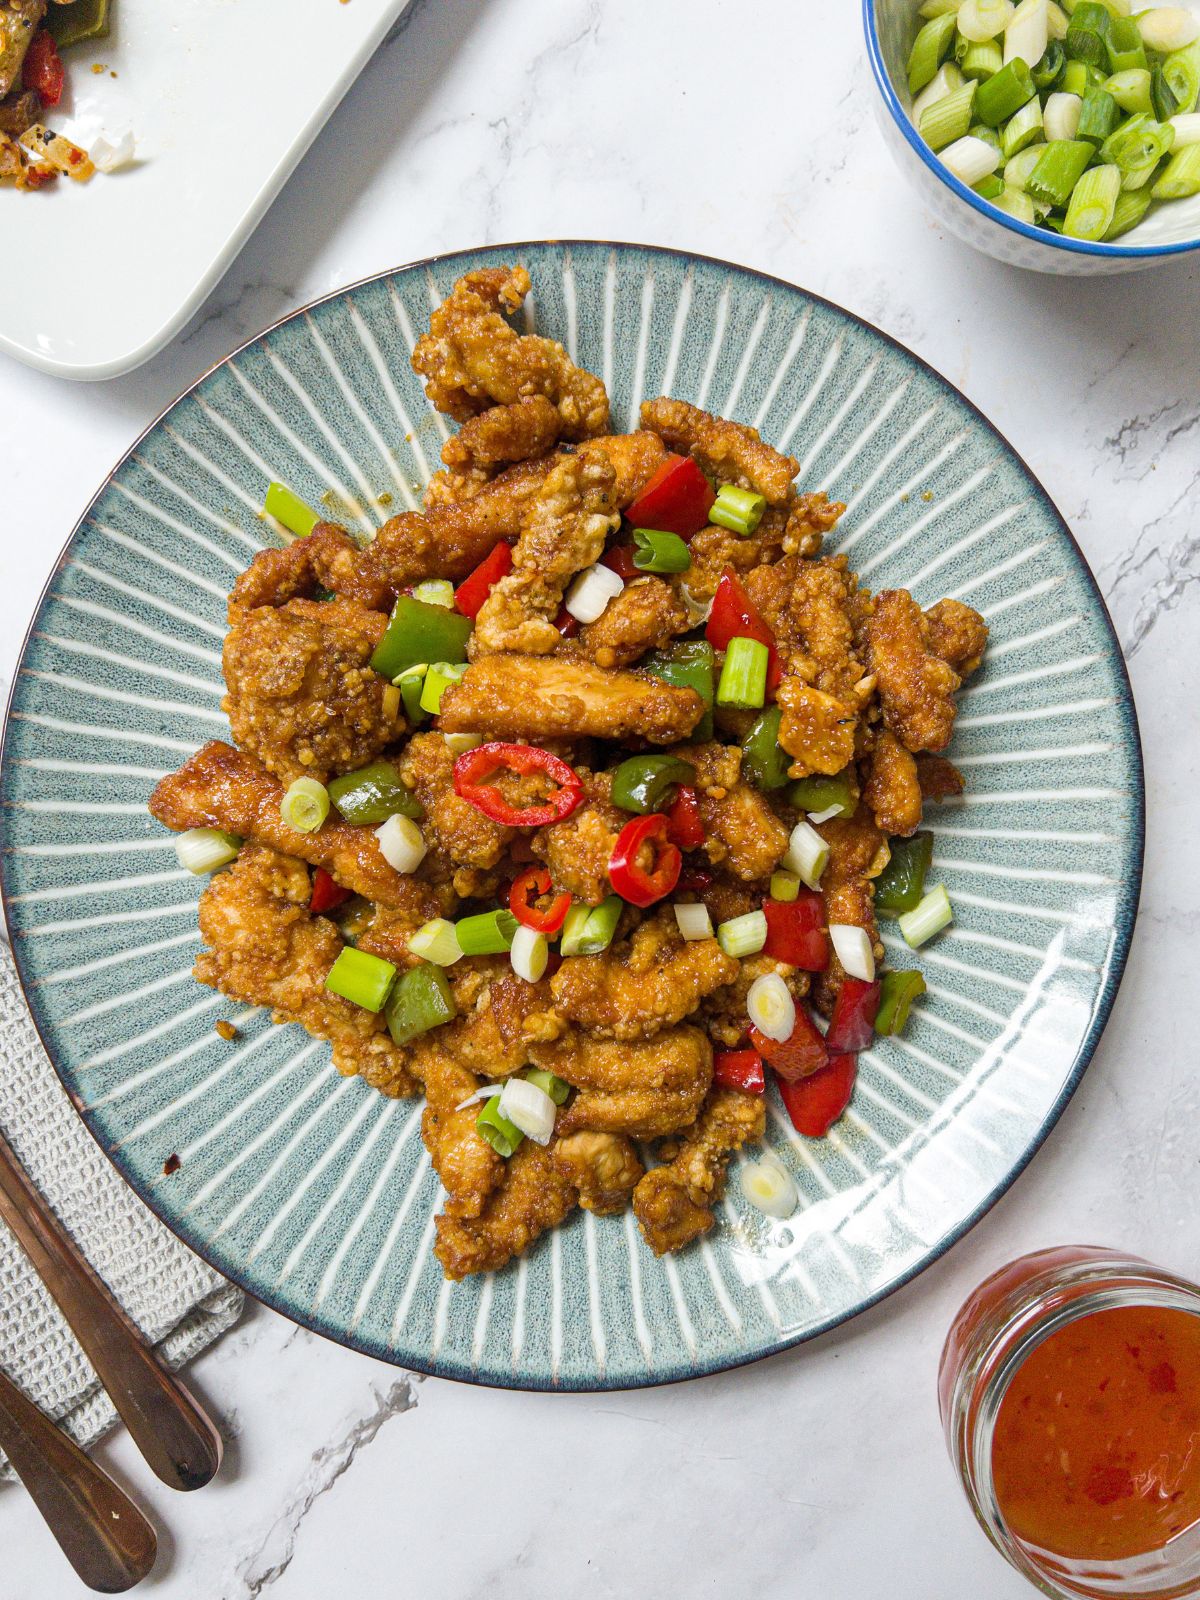 a plate of crispy chicken pieces garnished with spring onion & chilli, with a knife and fork next to the plate and a pot of sweet chilli sauce and spring onions./